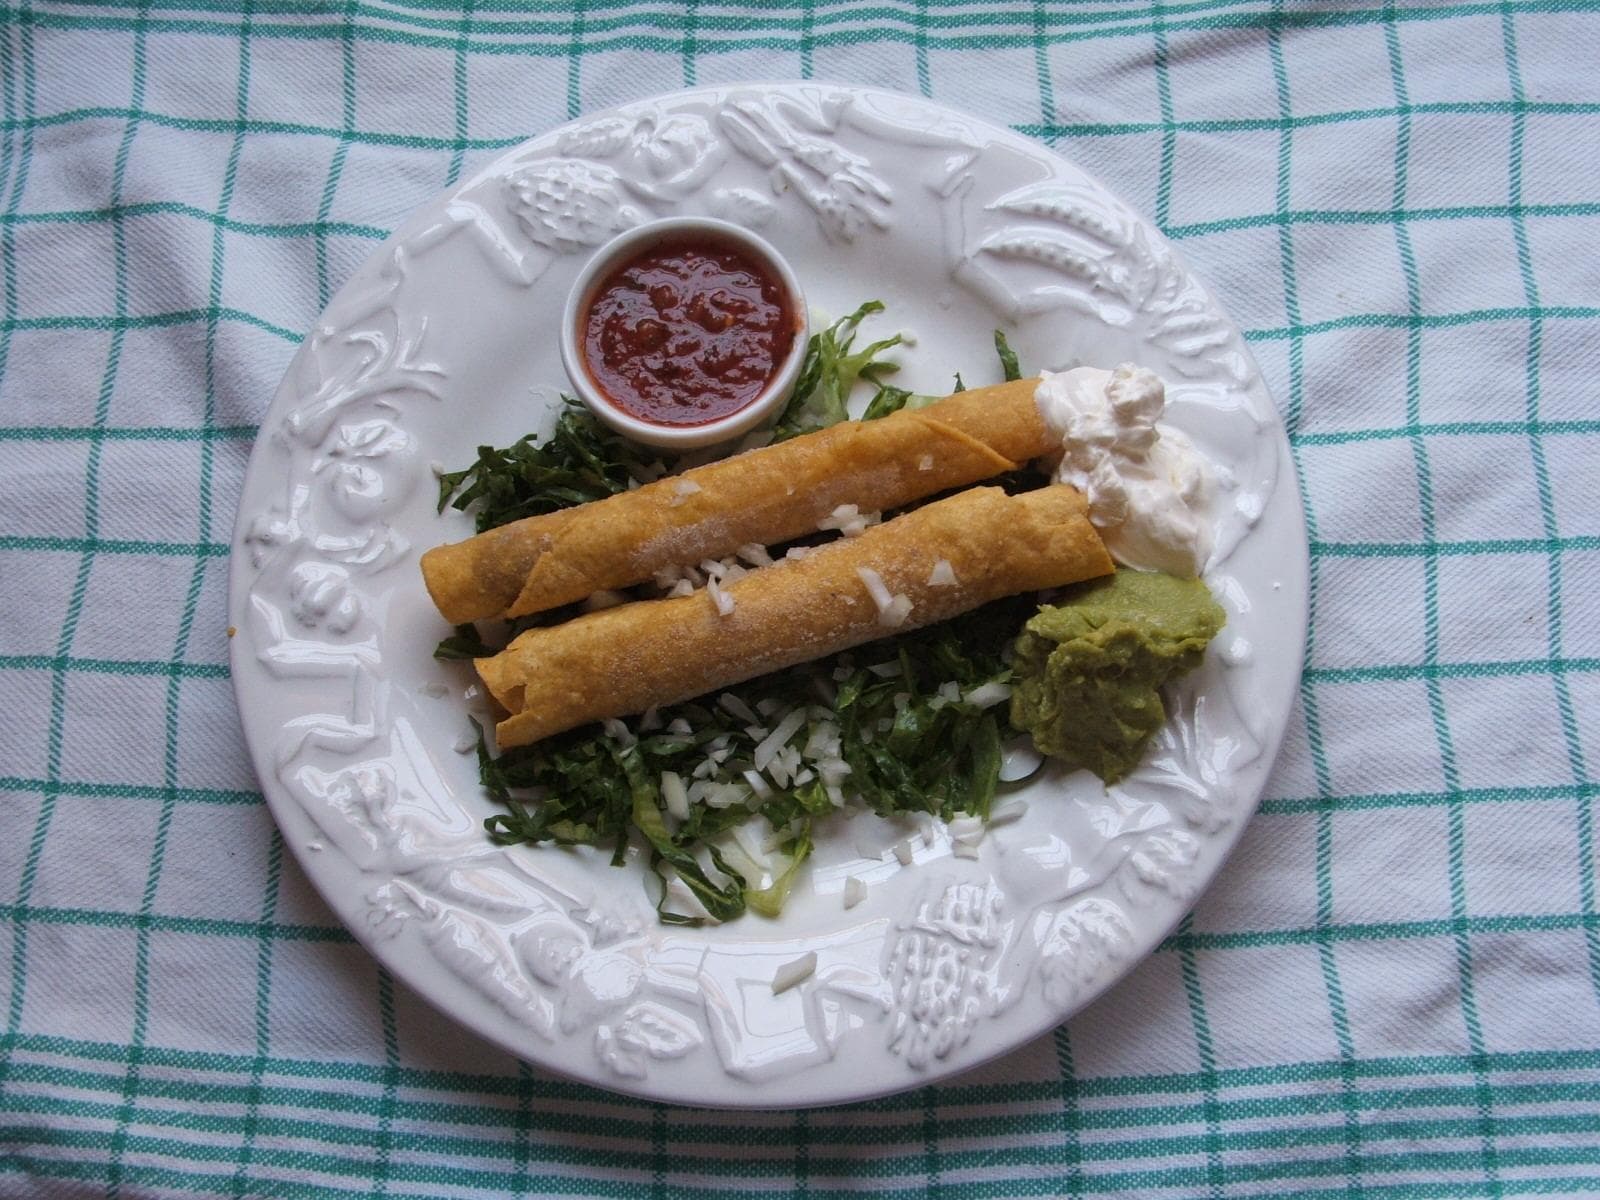 Taquito on Random Most Delicious Foods to Dunk of Deep Fry